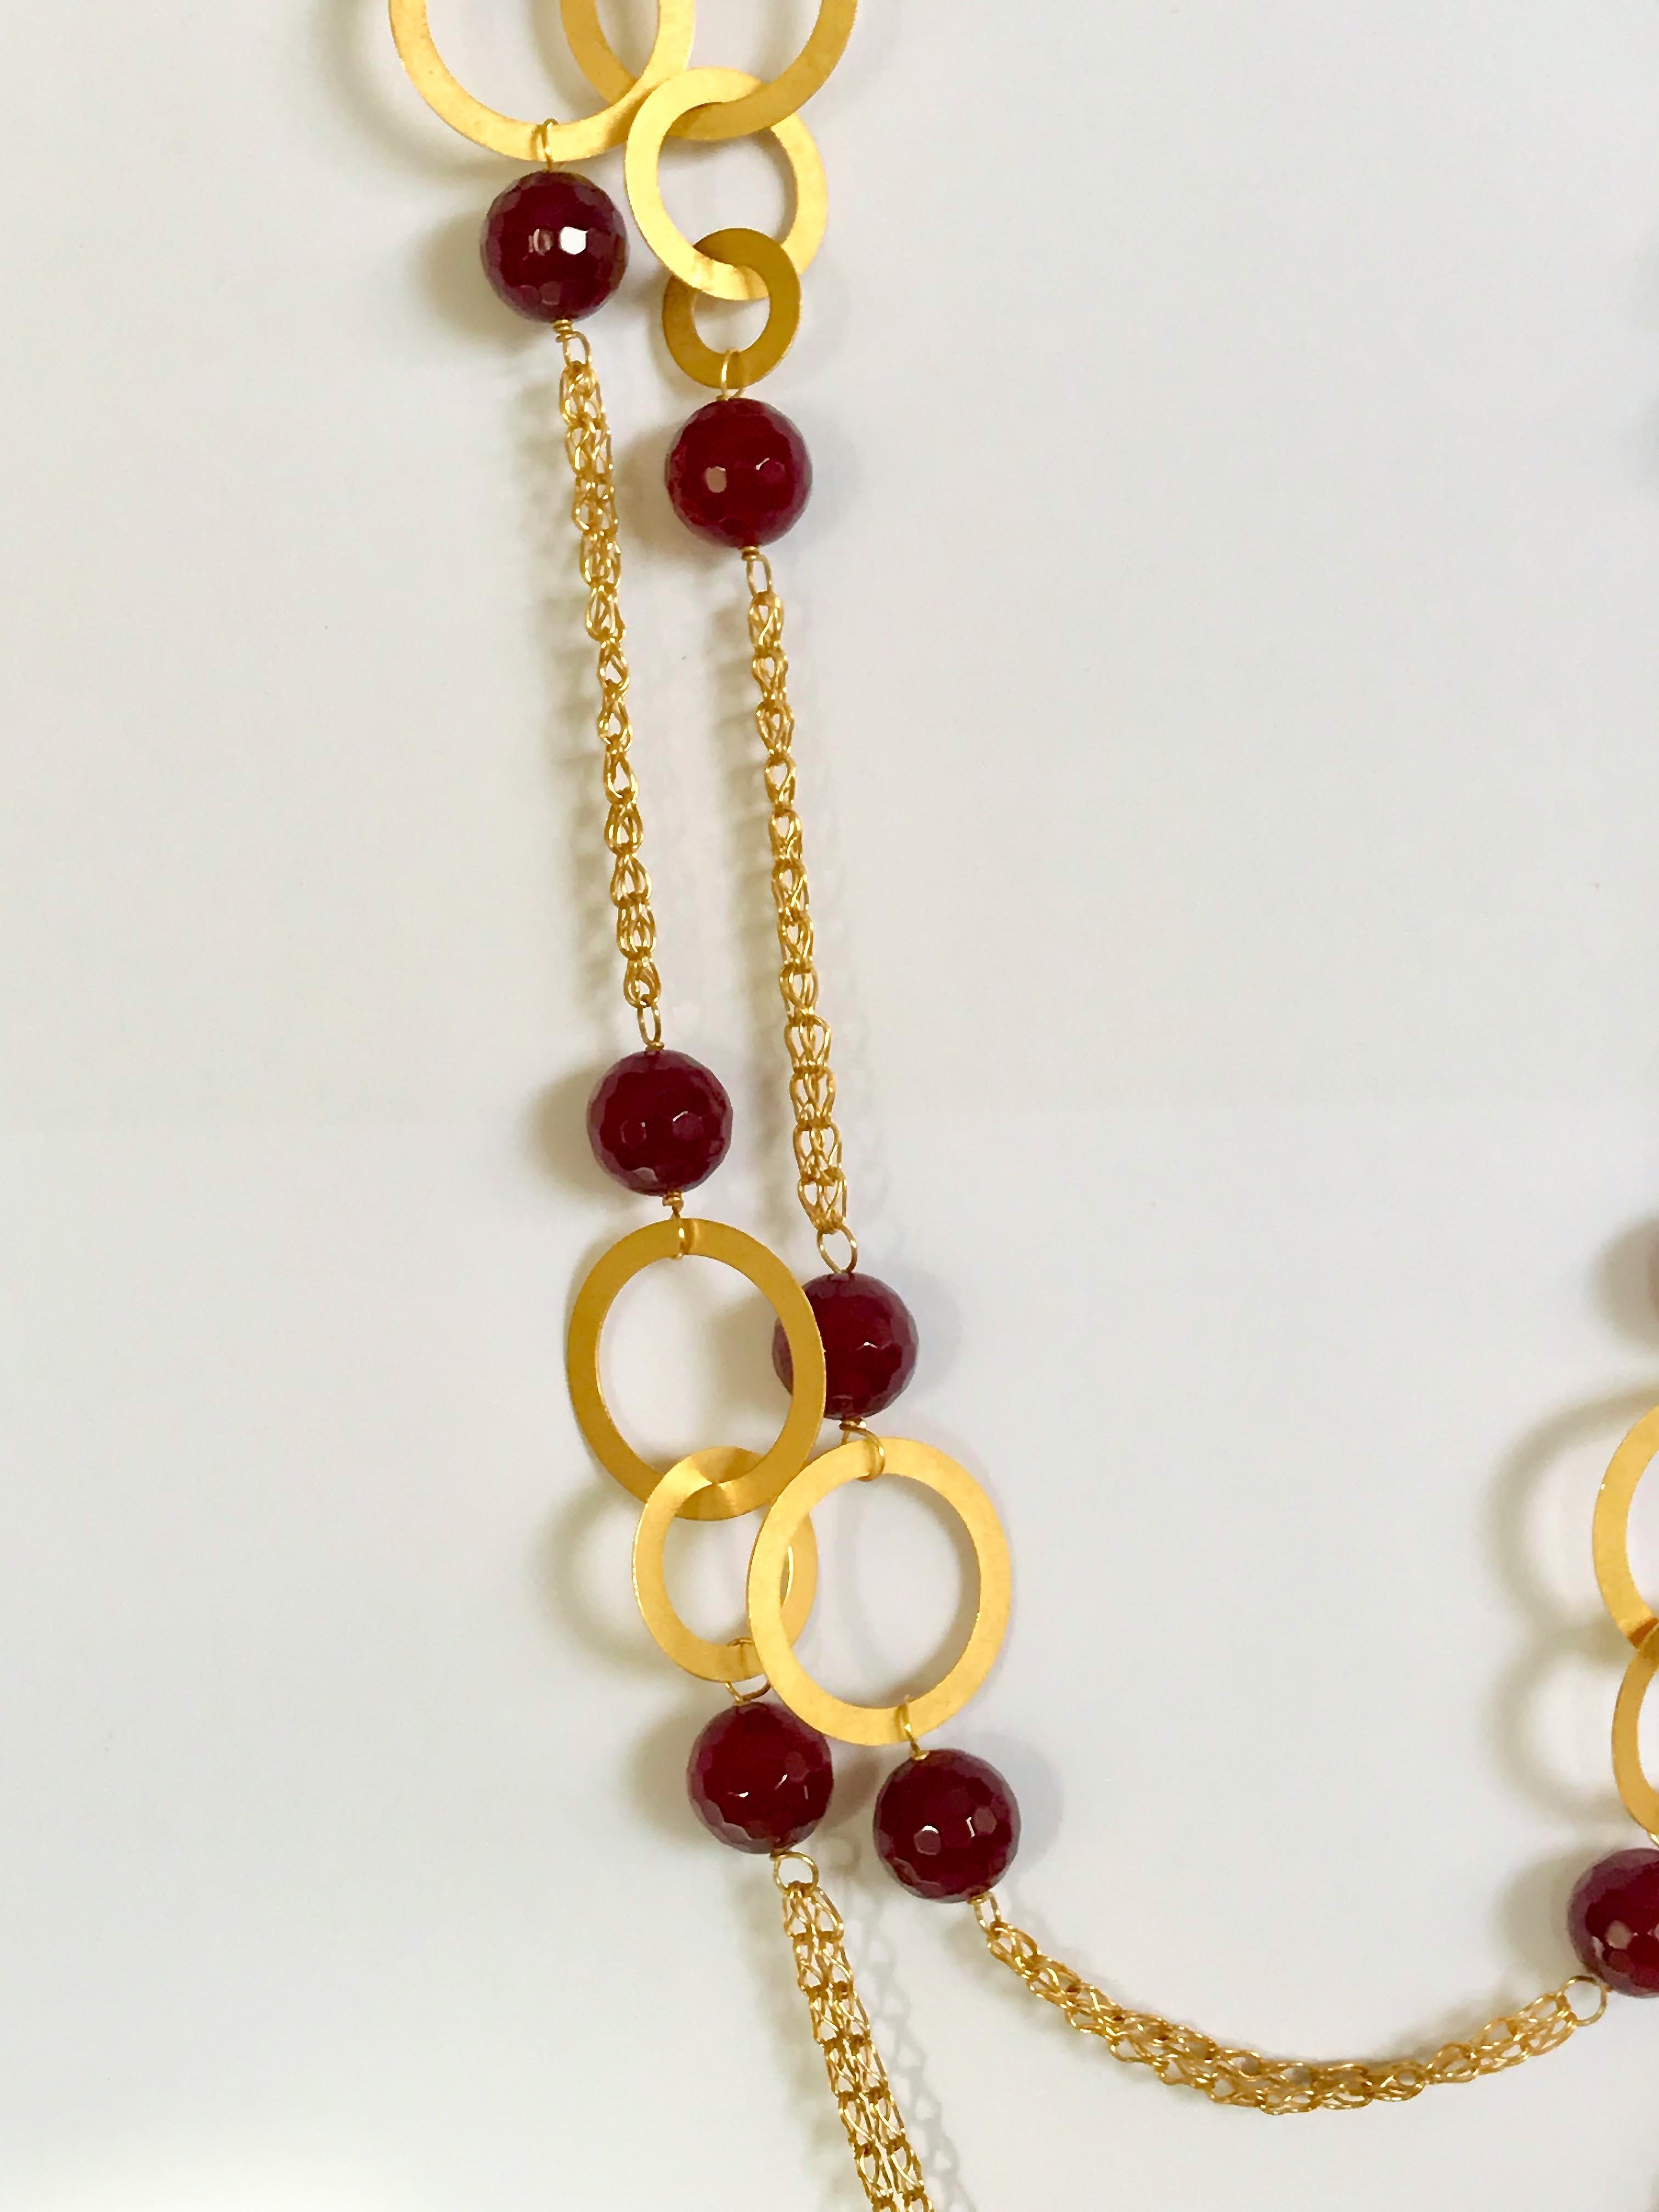 18 Karat Solid Yellow Gold Handmade Cranberry Agate Chain Necklace For Sale 5